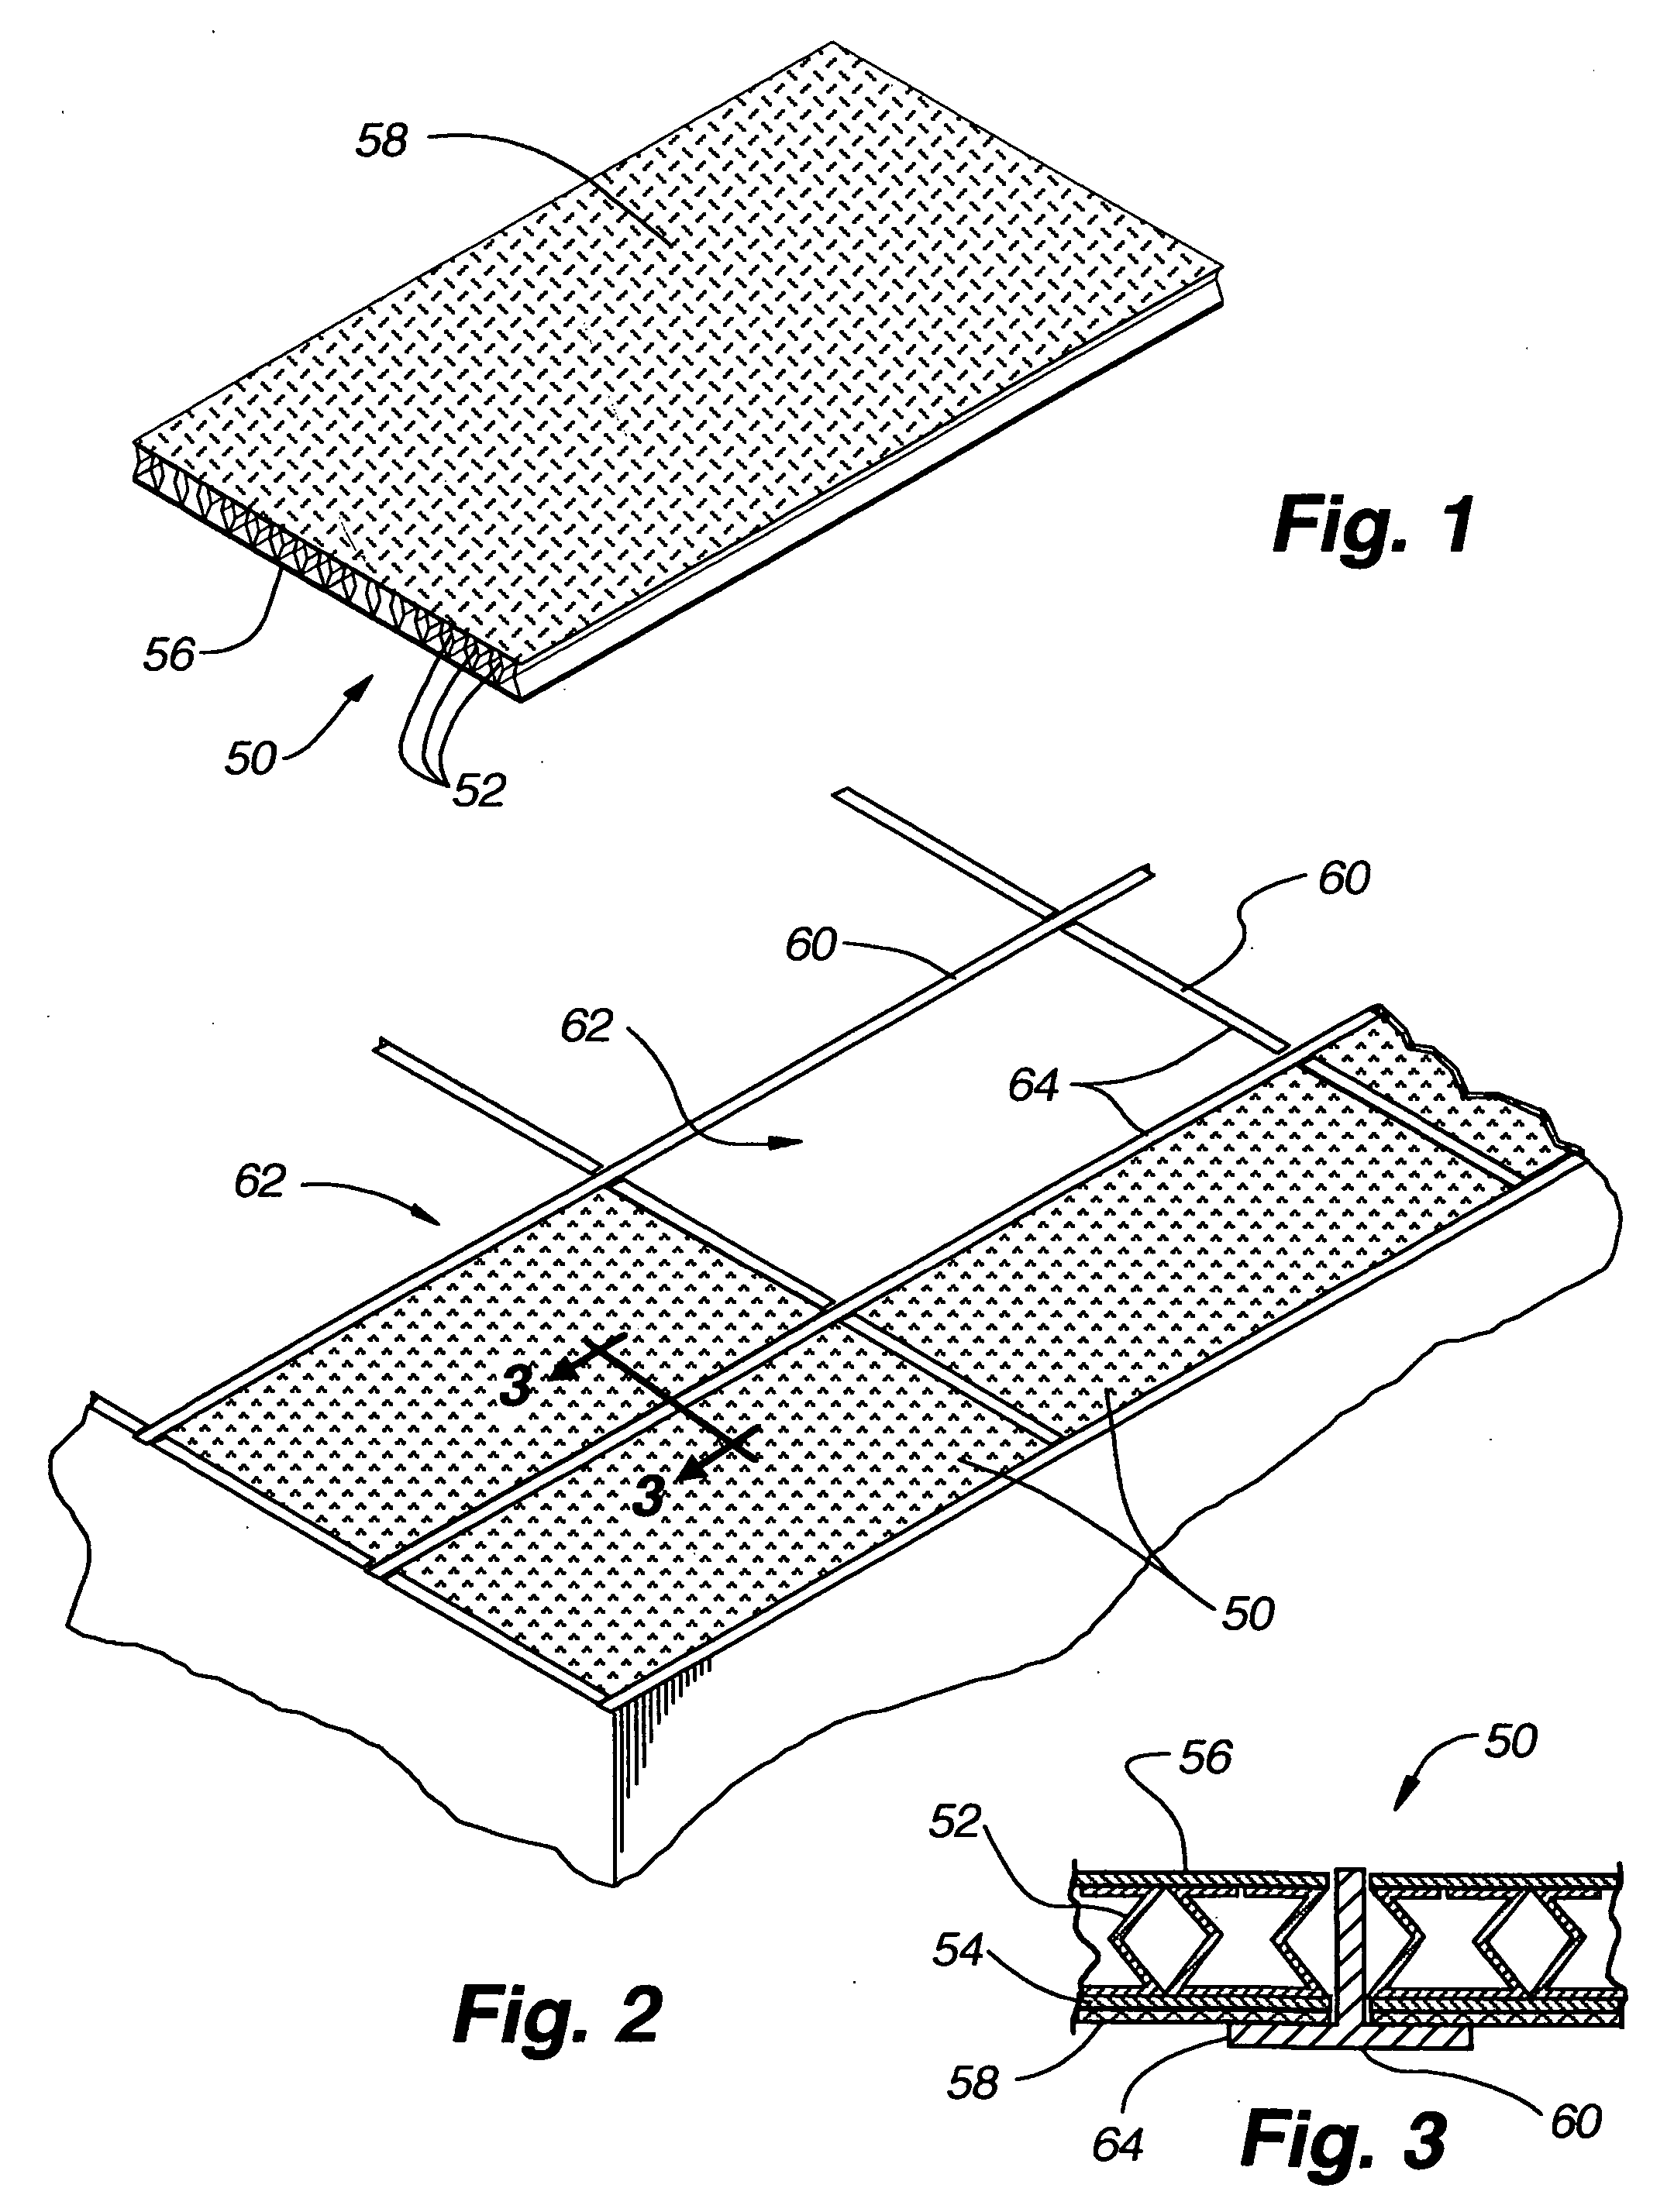 Method of manufacturing a compressible structural panel with reinforcing dividers